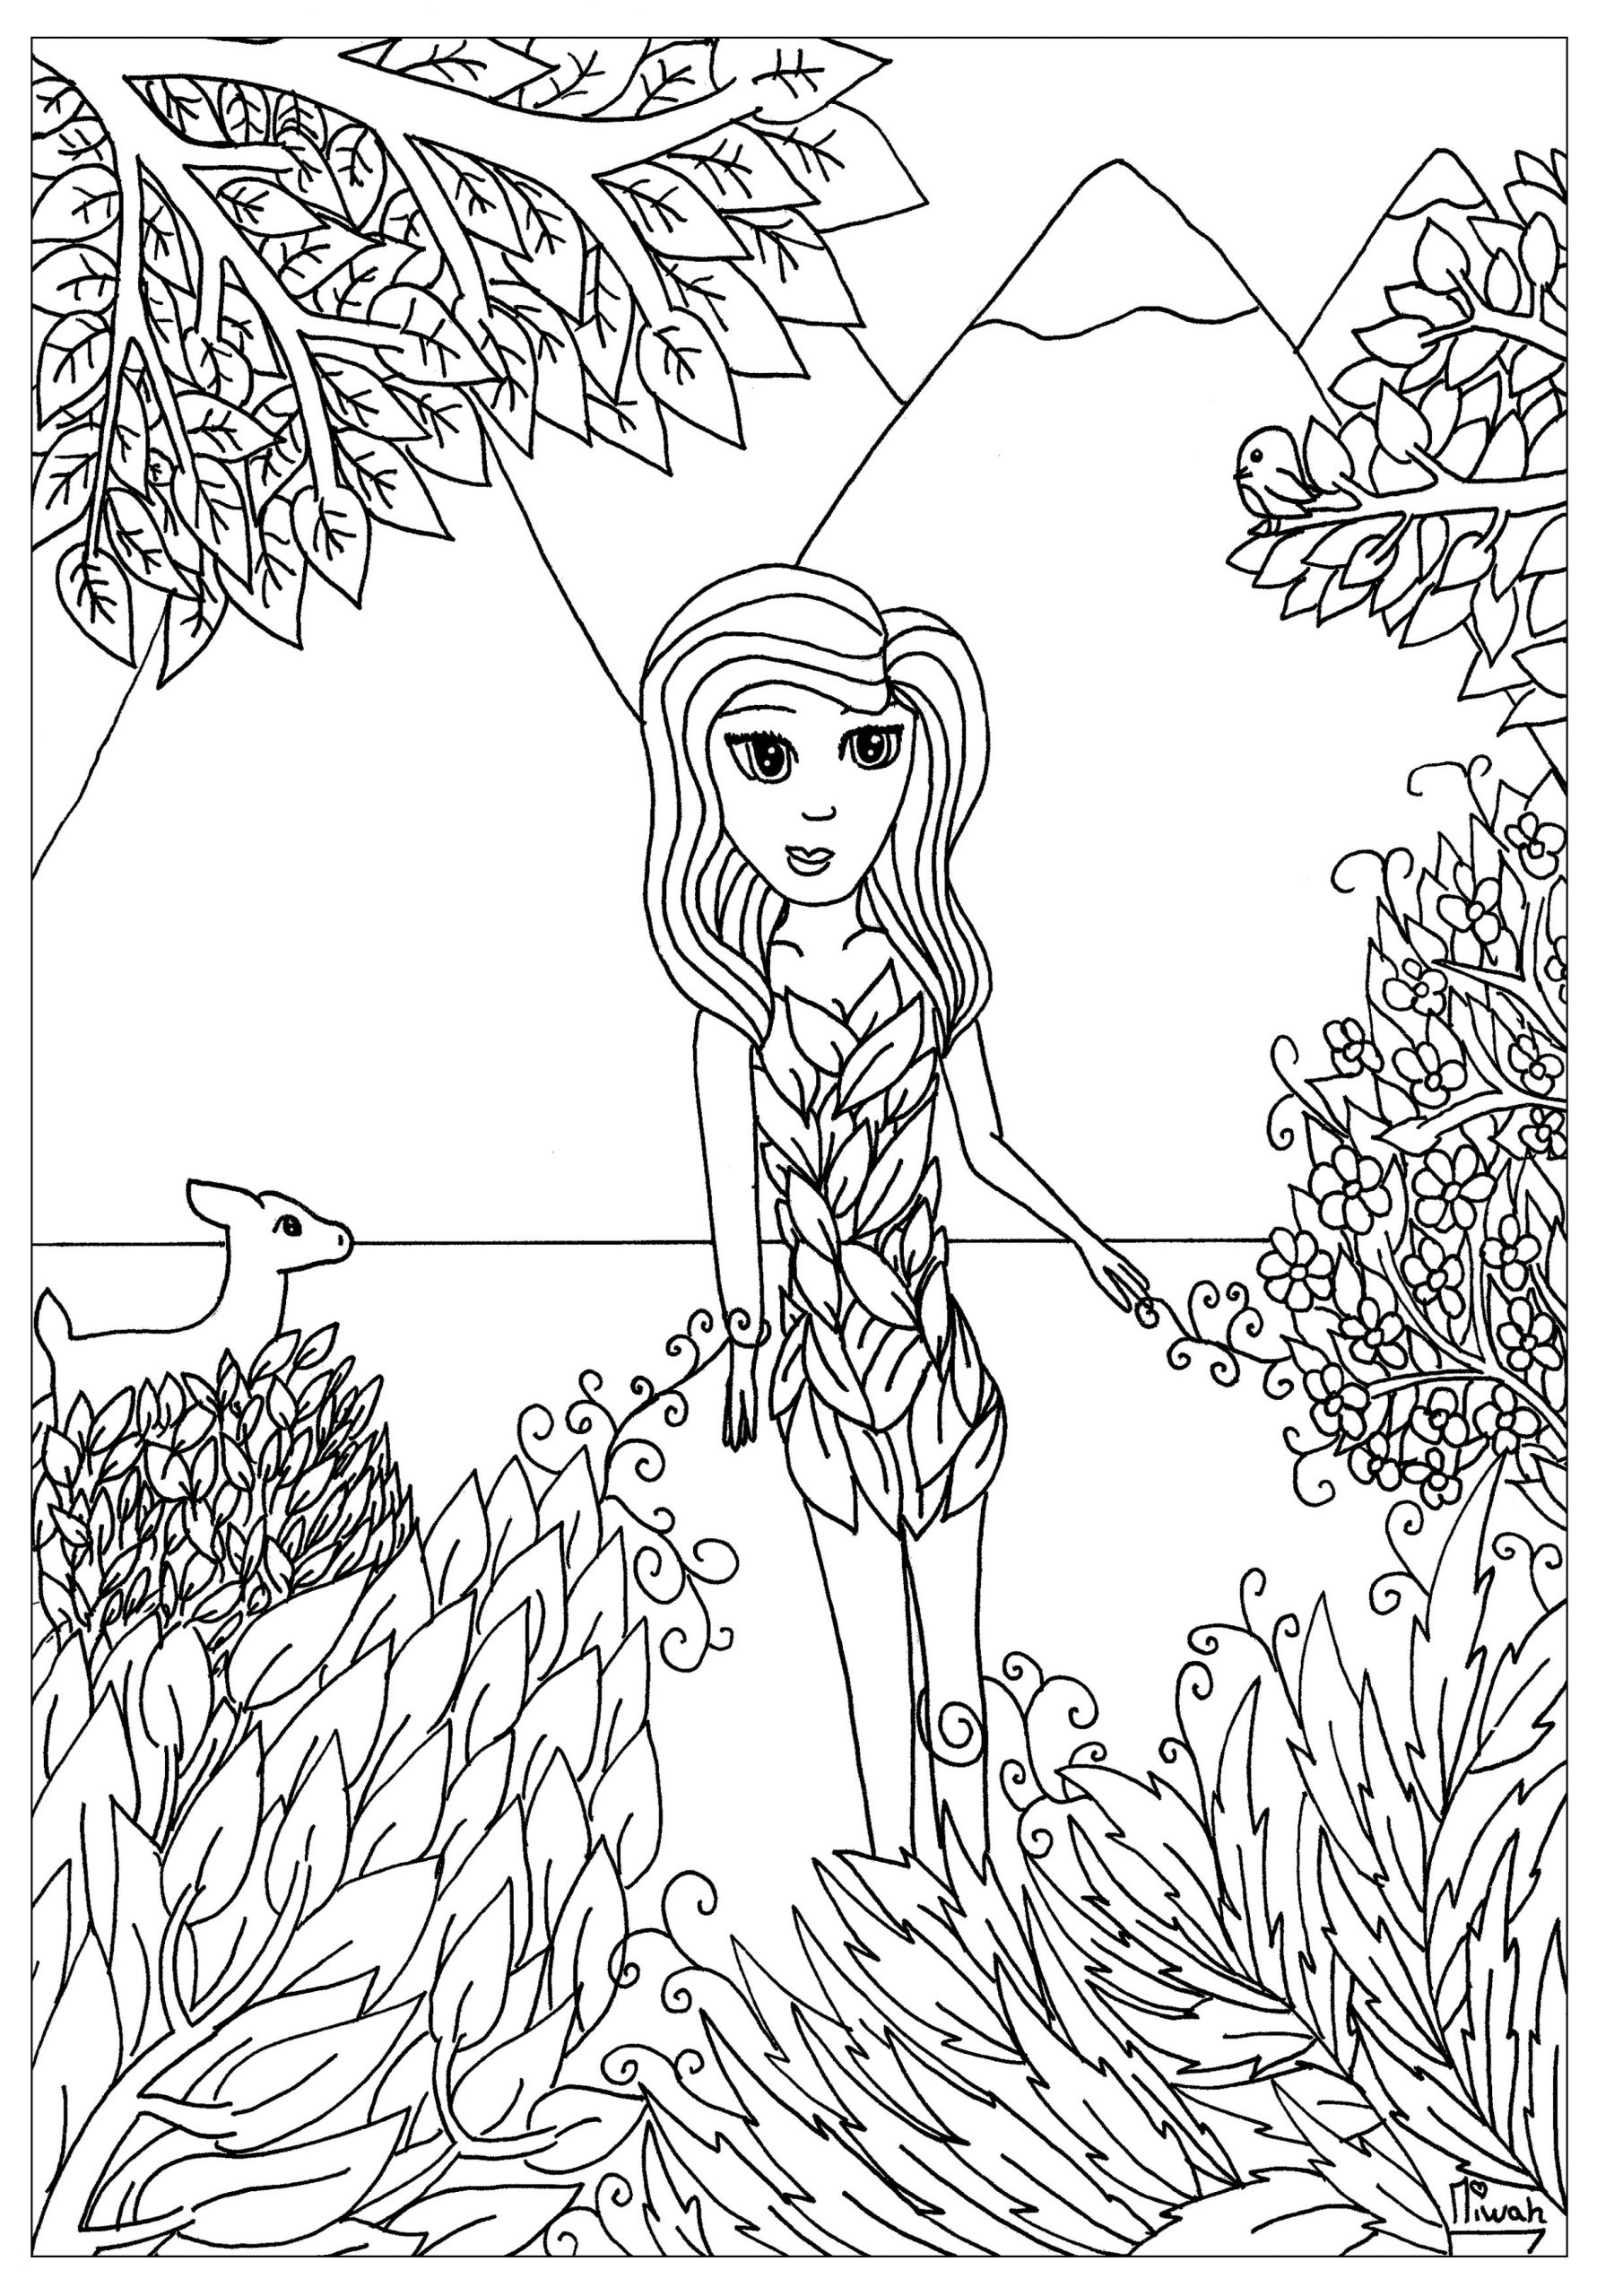 Coloring Pages Of Girls For Adults
 Flower girl Anti stress Adult Coloring Pages